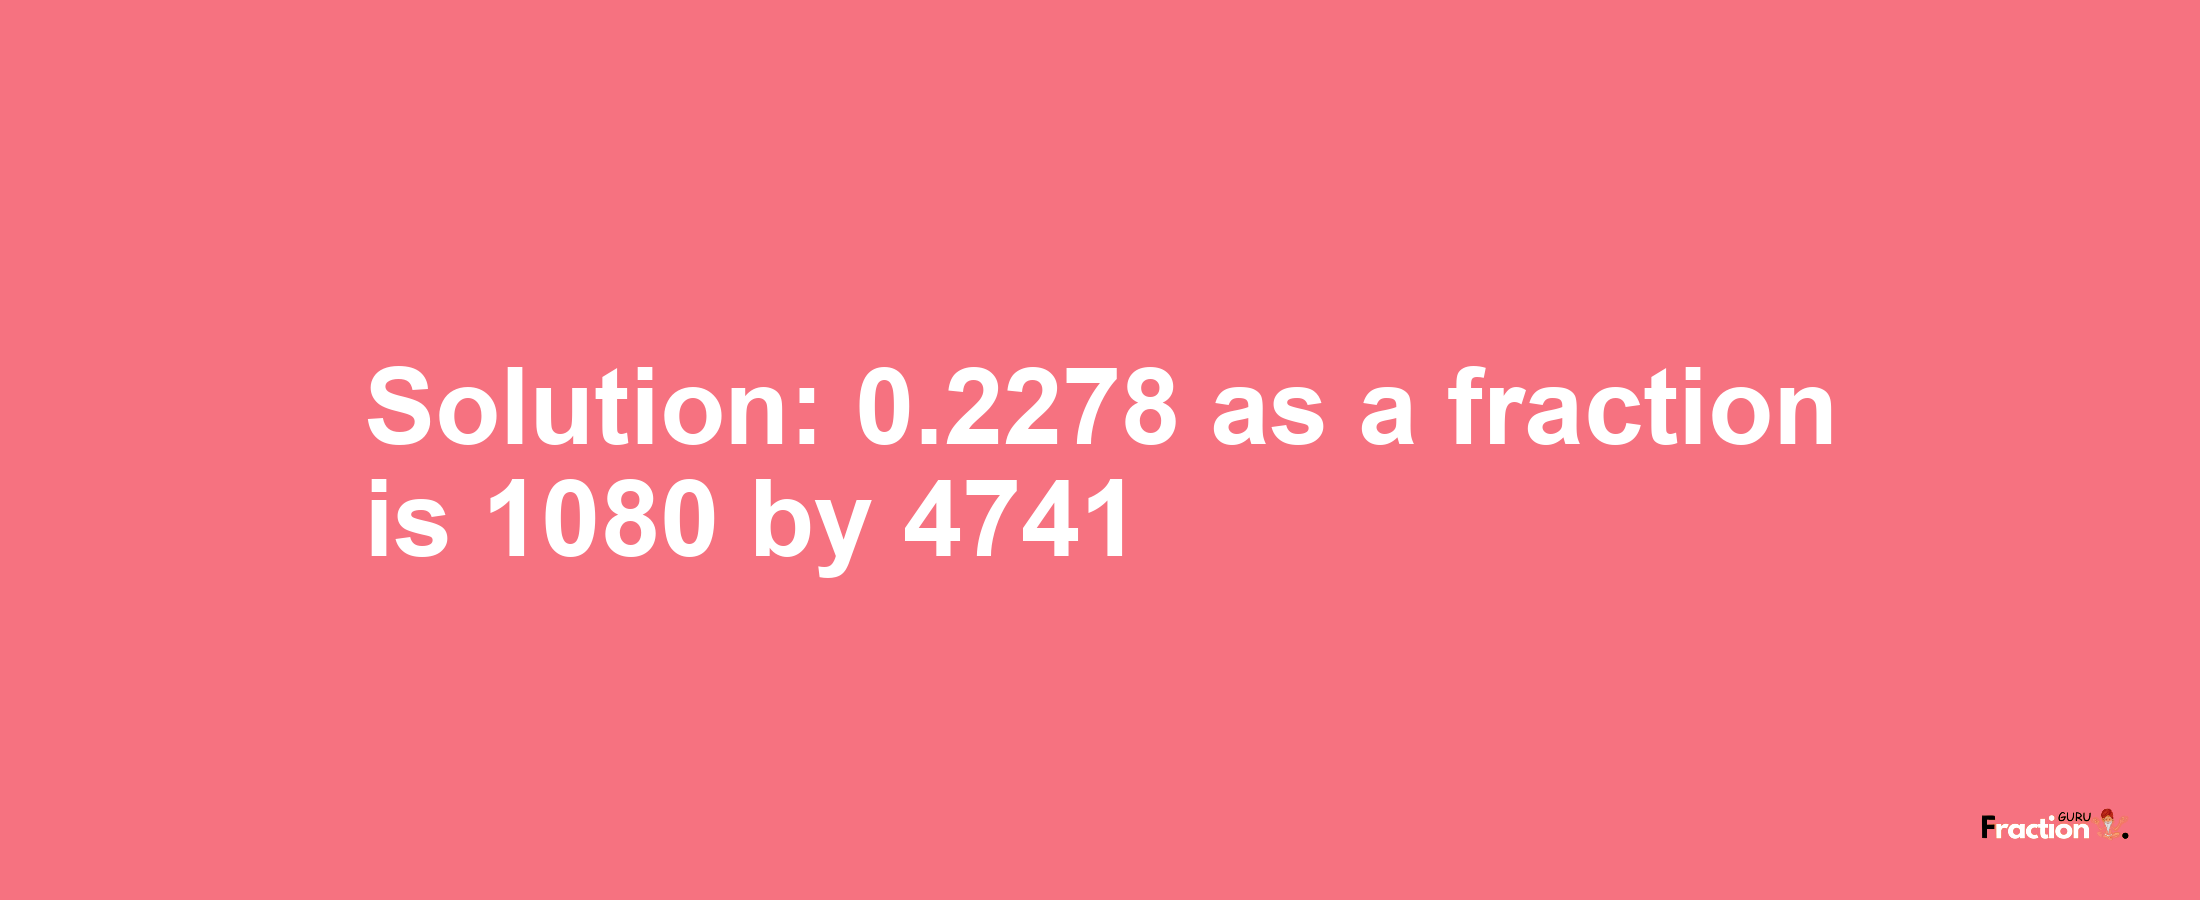 Solution:0.2278 as a fraction is 1080/4741